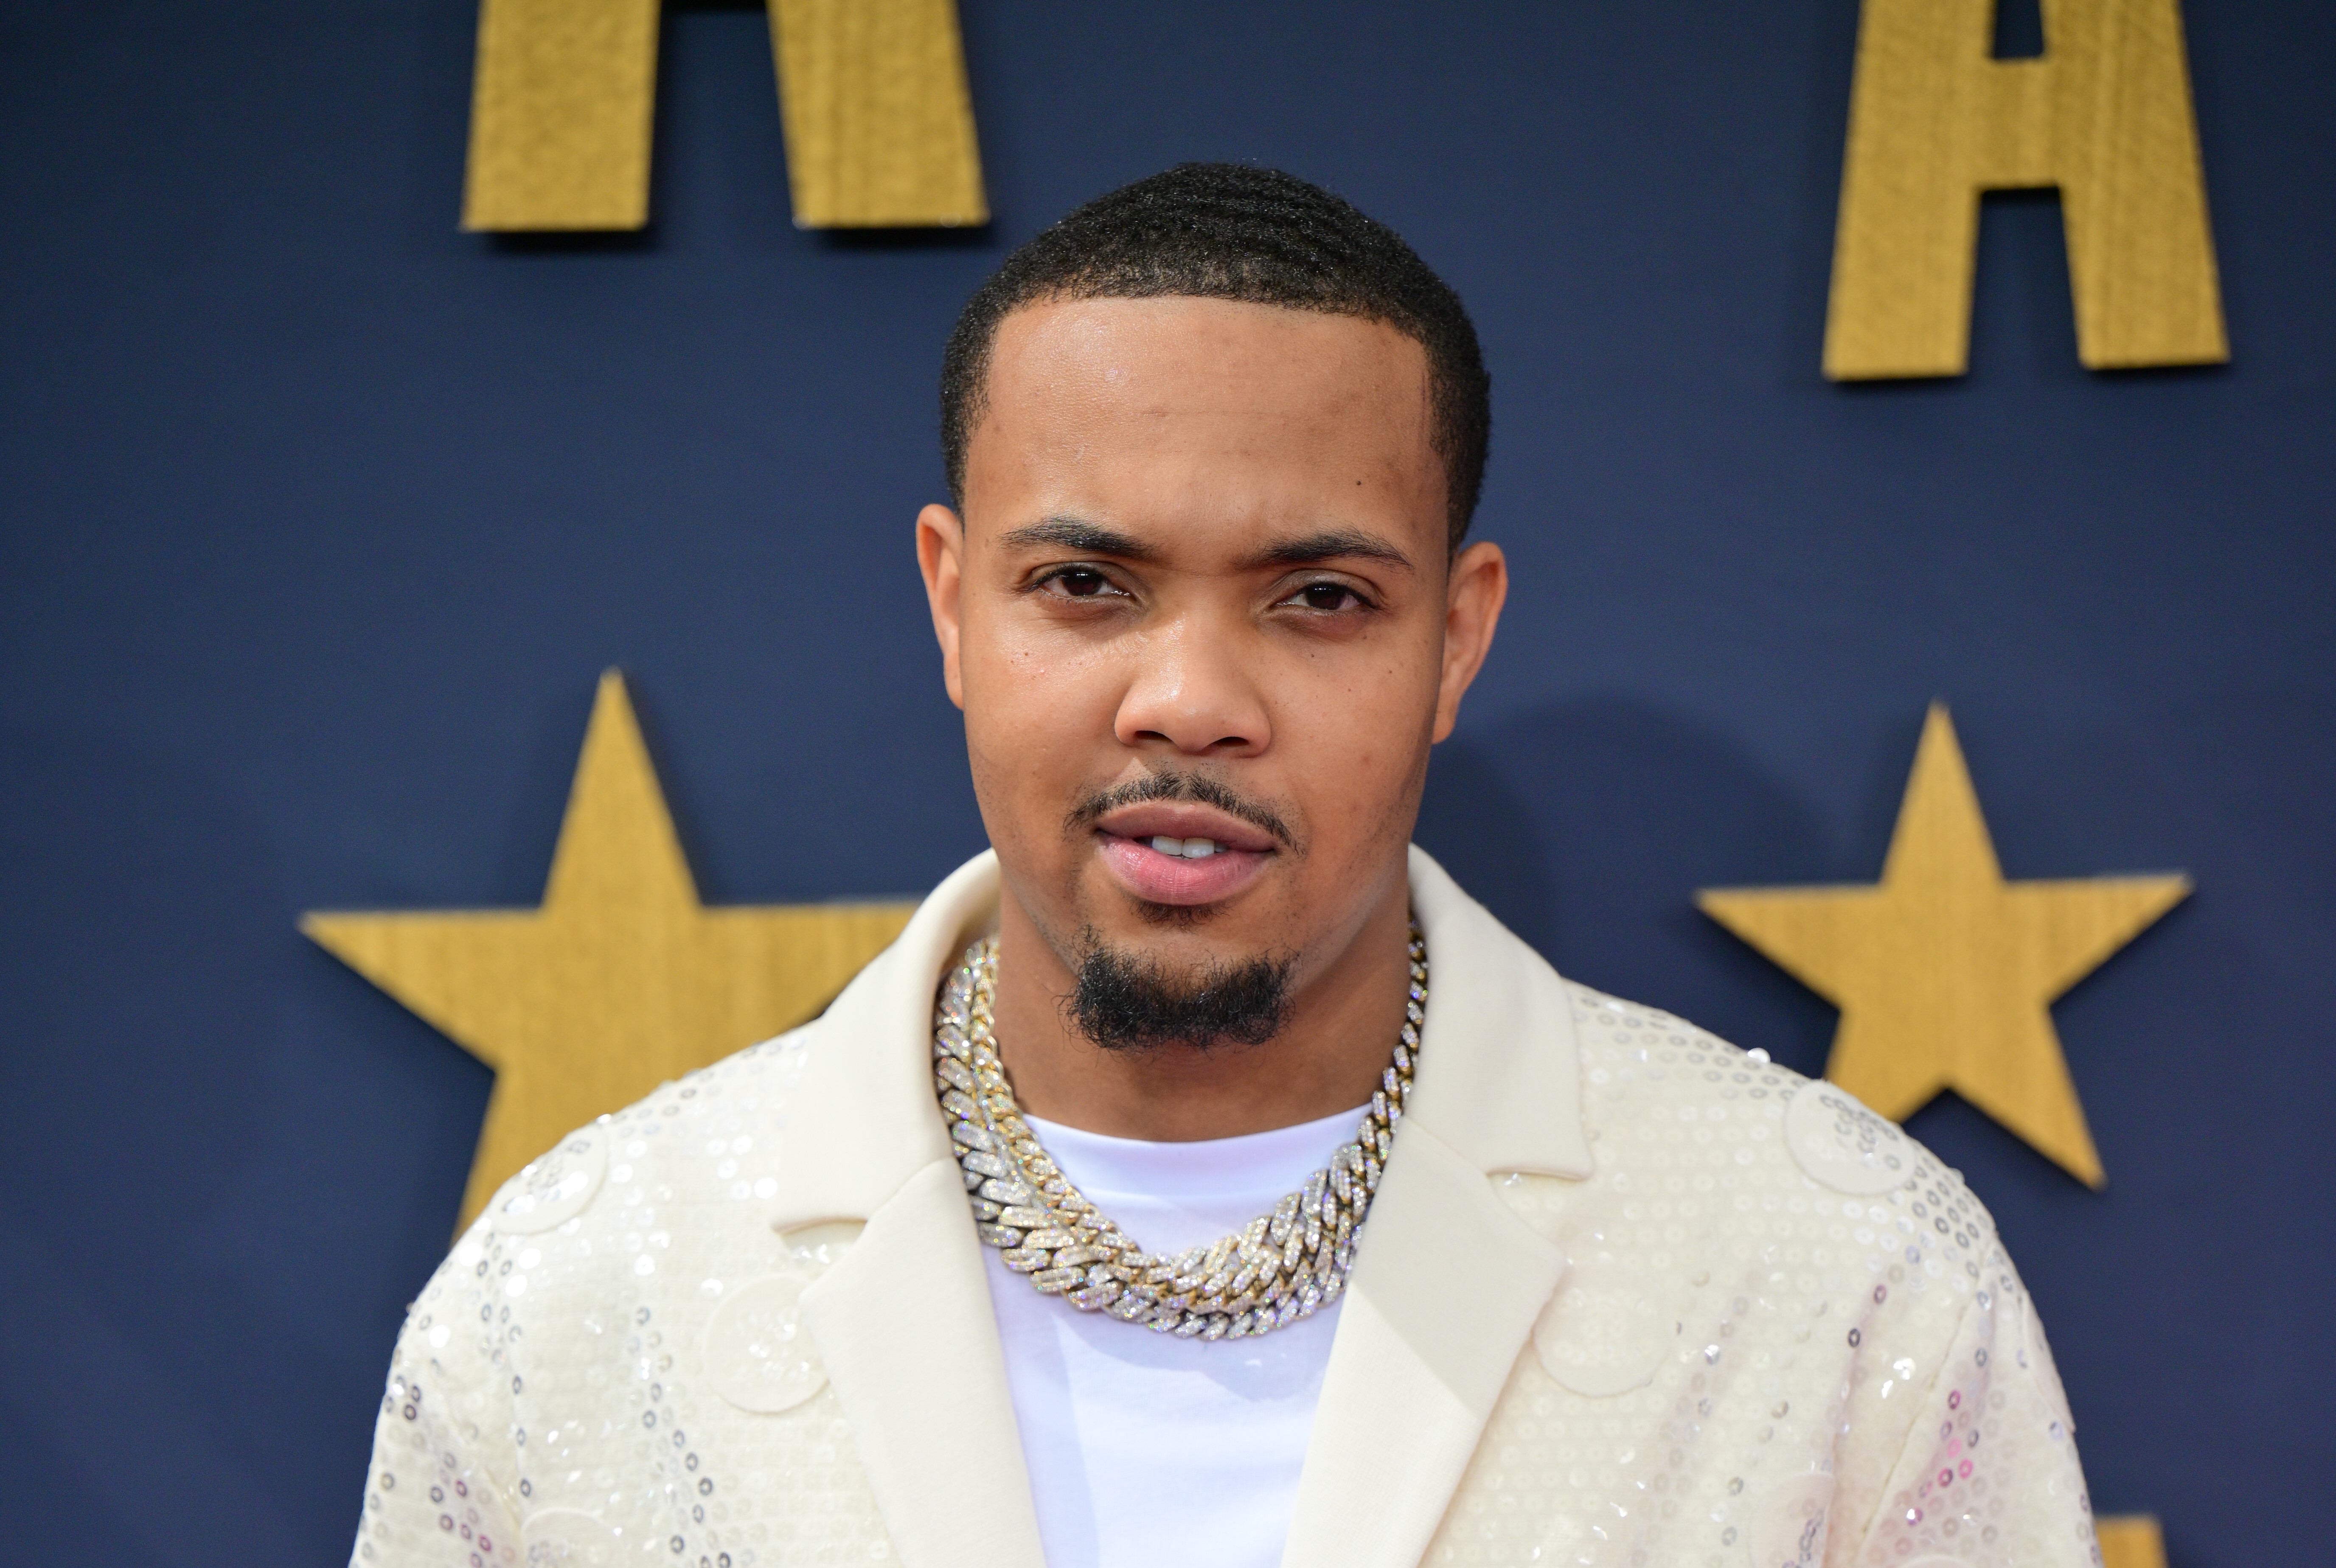 G Herbo arrives at the 2023 BET Awards at the Microsoft Theater in Los Angeles, California.